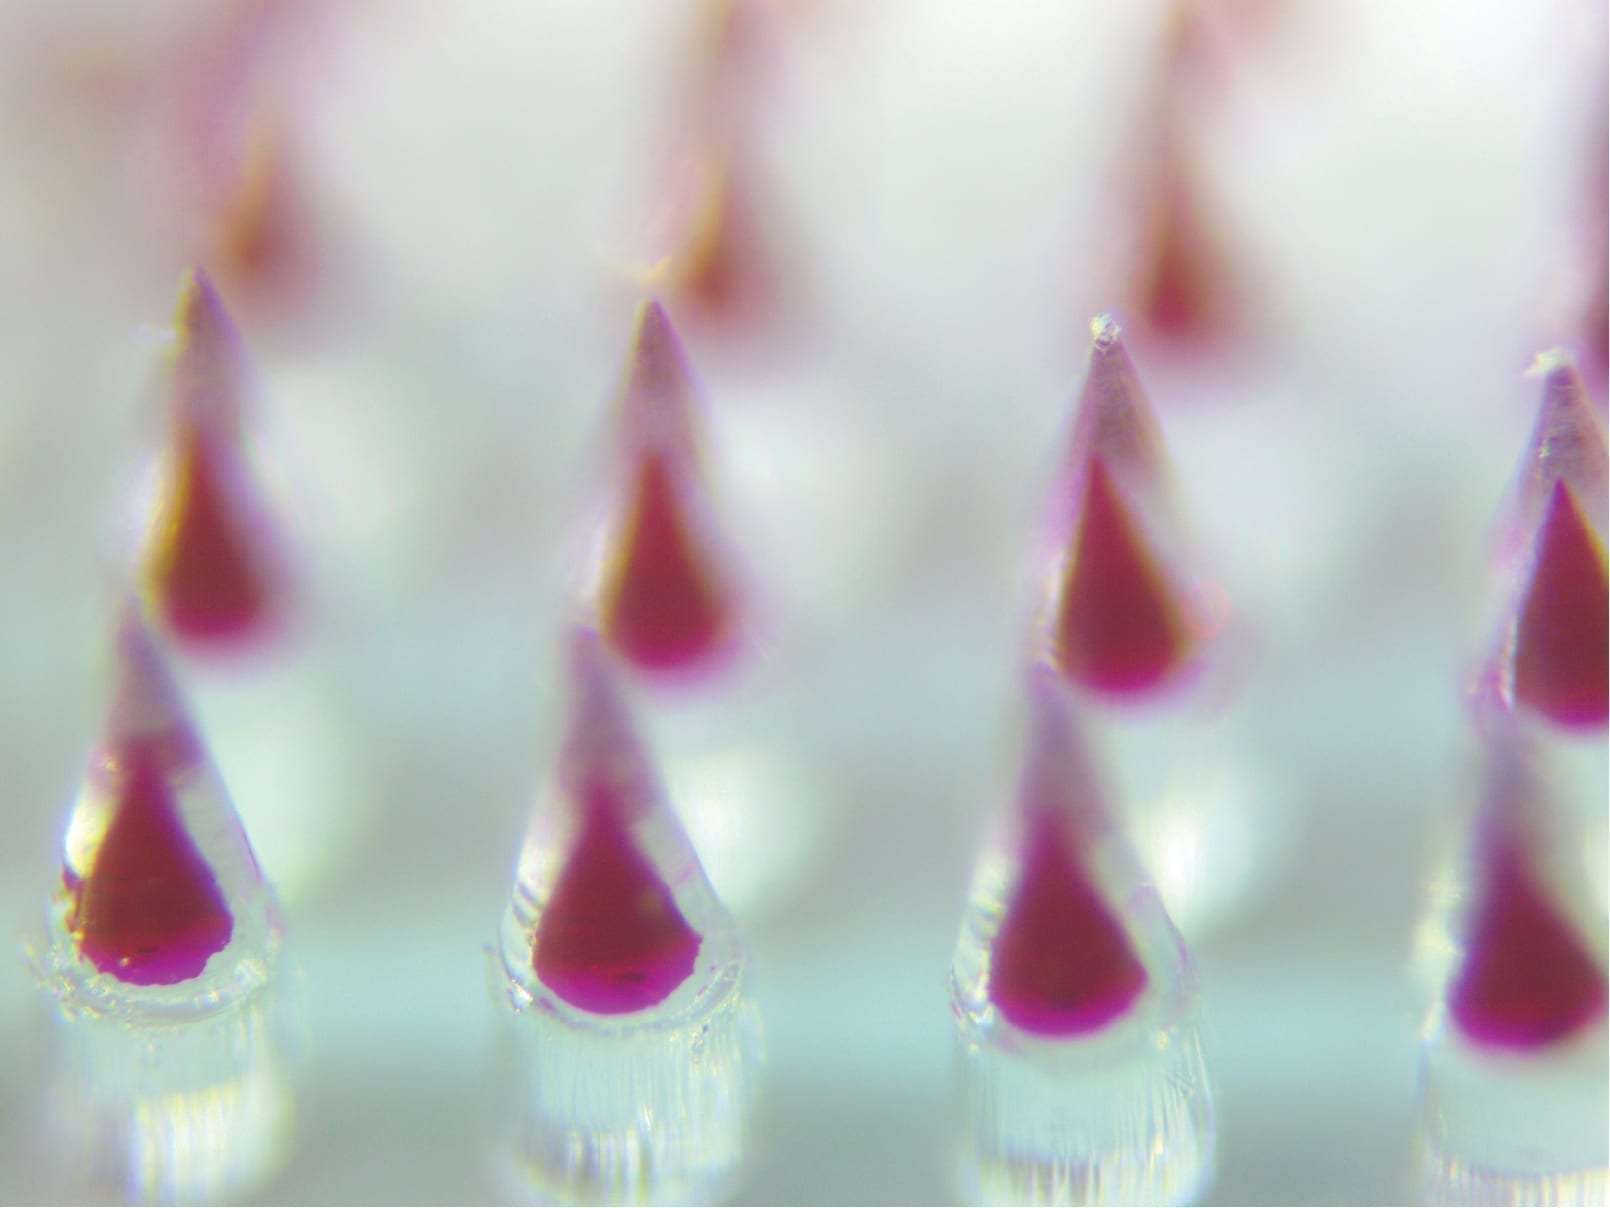 Microneedle technology offers several advantages over traditional vaccines, including ease of application and the reduction of hazardous medical waste (courtesy of Thanh Nguyen).